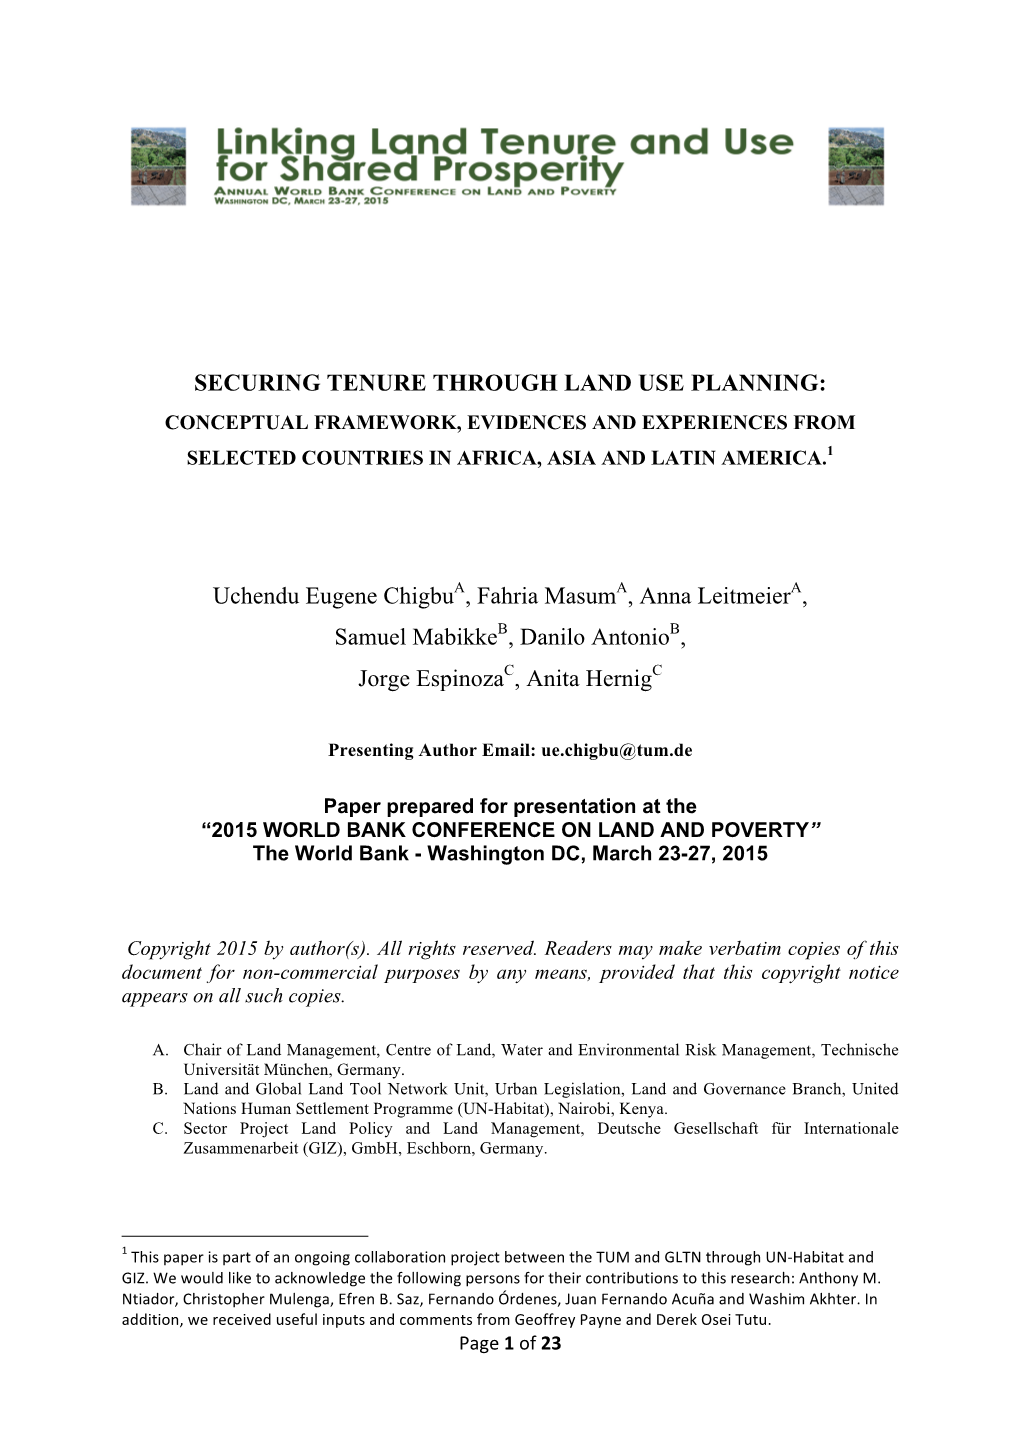 Securing Tenure Through Land Use Planning: Conceptual Framework, Evidences and Experiences from Selected Countries in Africa, Asia and Latin America.1